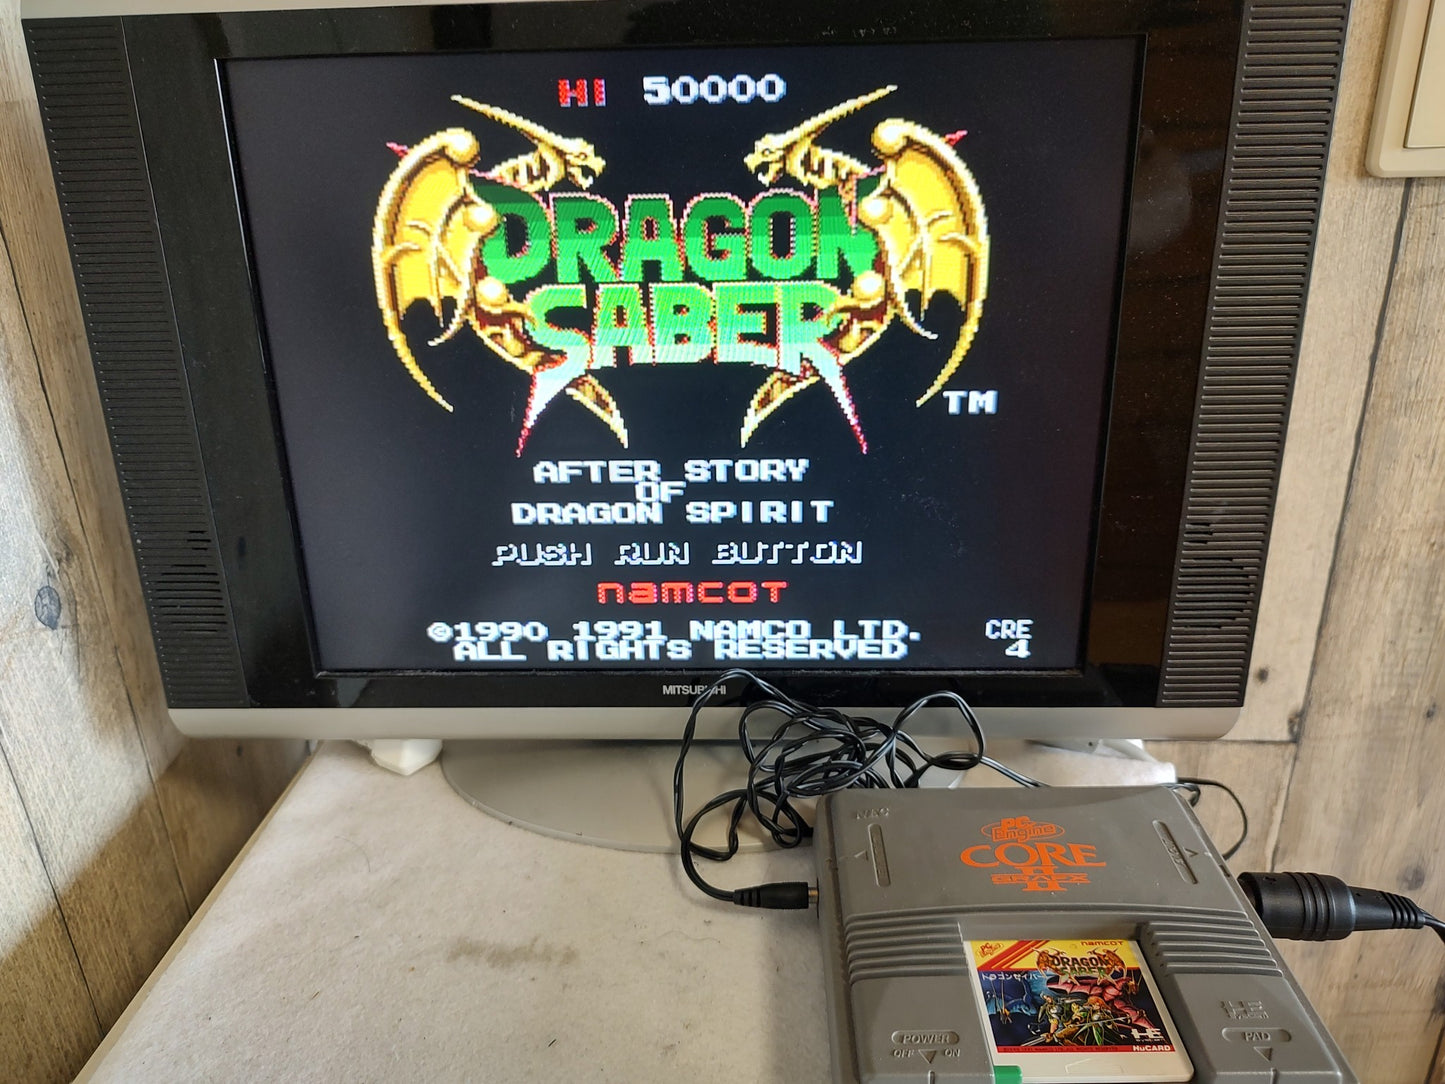 Dragon Saber NEC PC Engine TurboGrafx-16 PCE game/Hu-Card only tested-f0623-